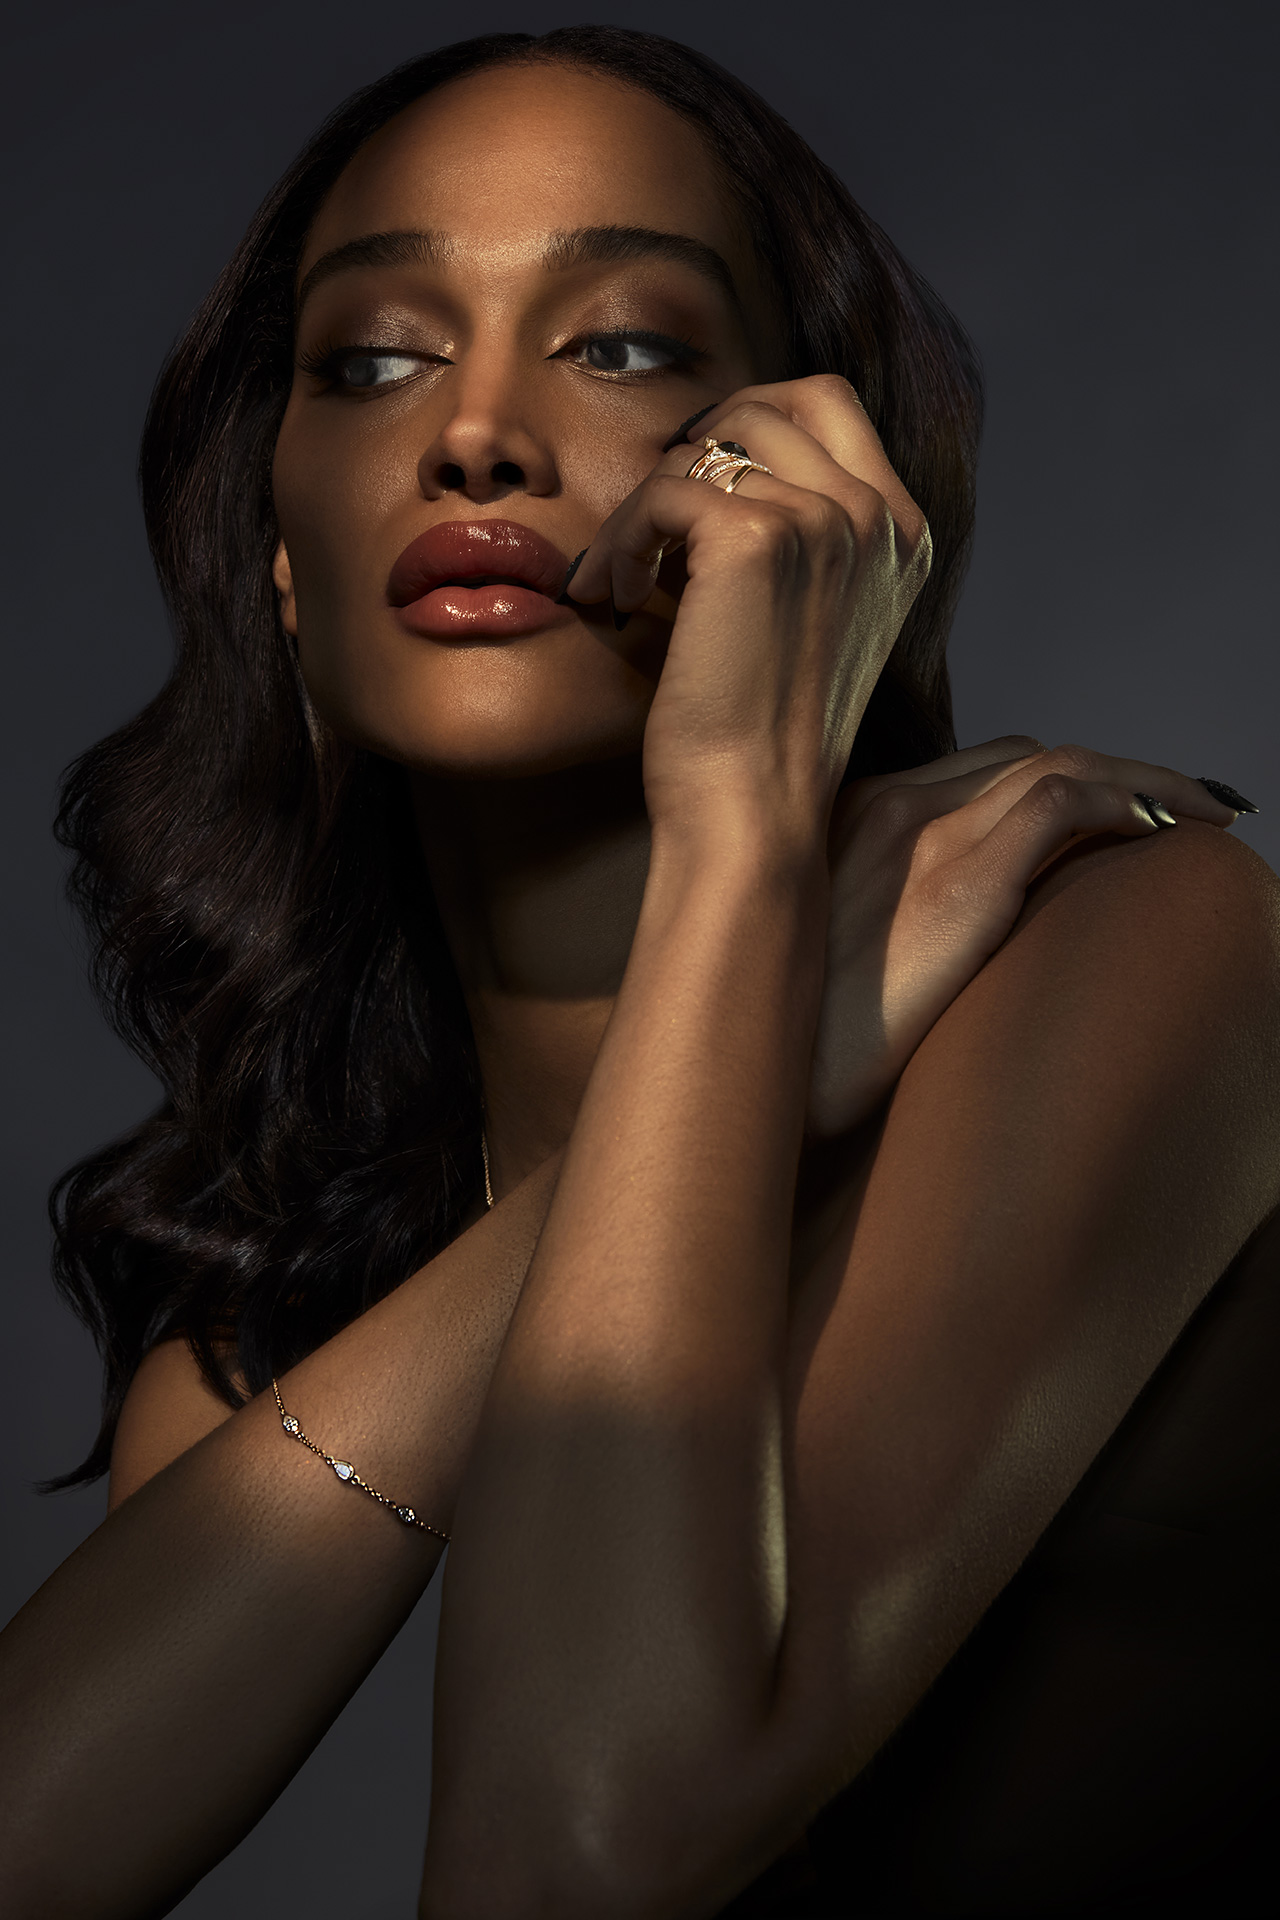 Elegance Redefined: An Intimate Beauty Editorial by Lians Jadan for Nearlywed Magazine